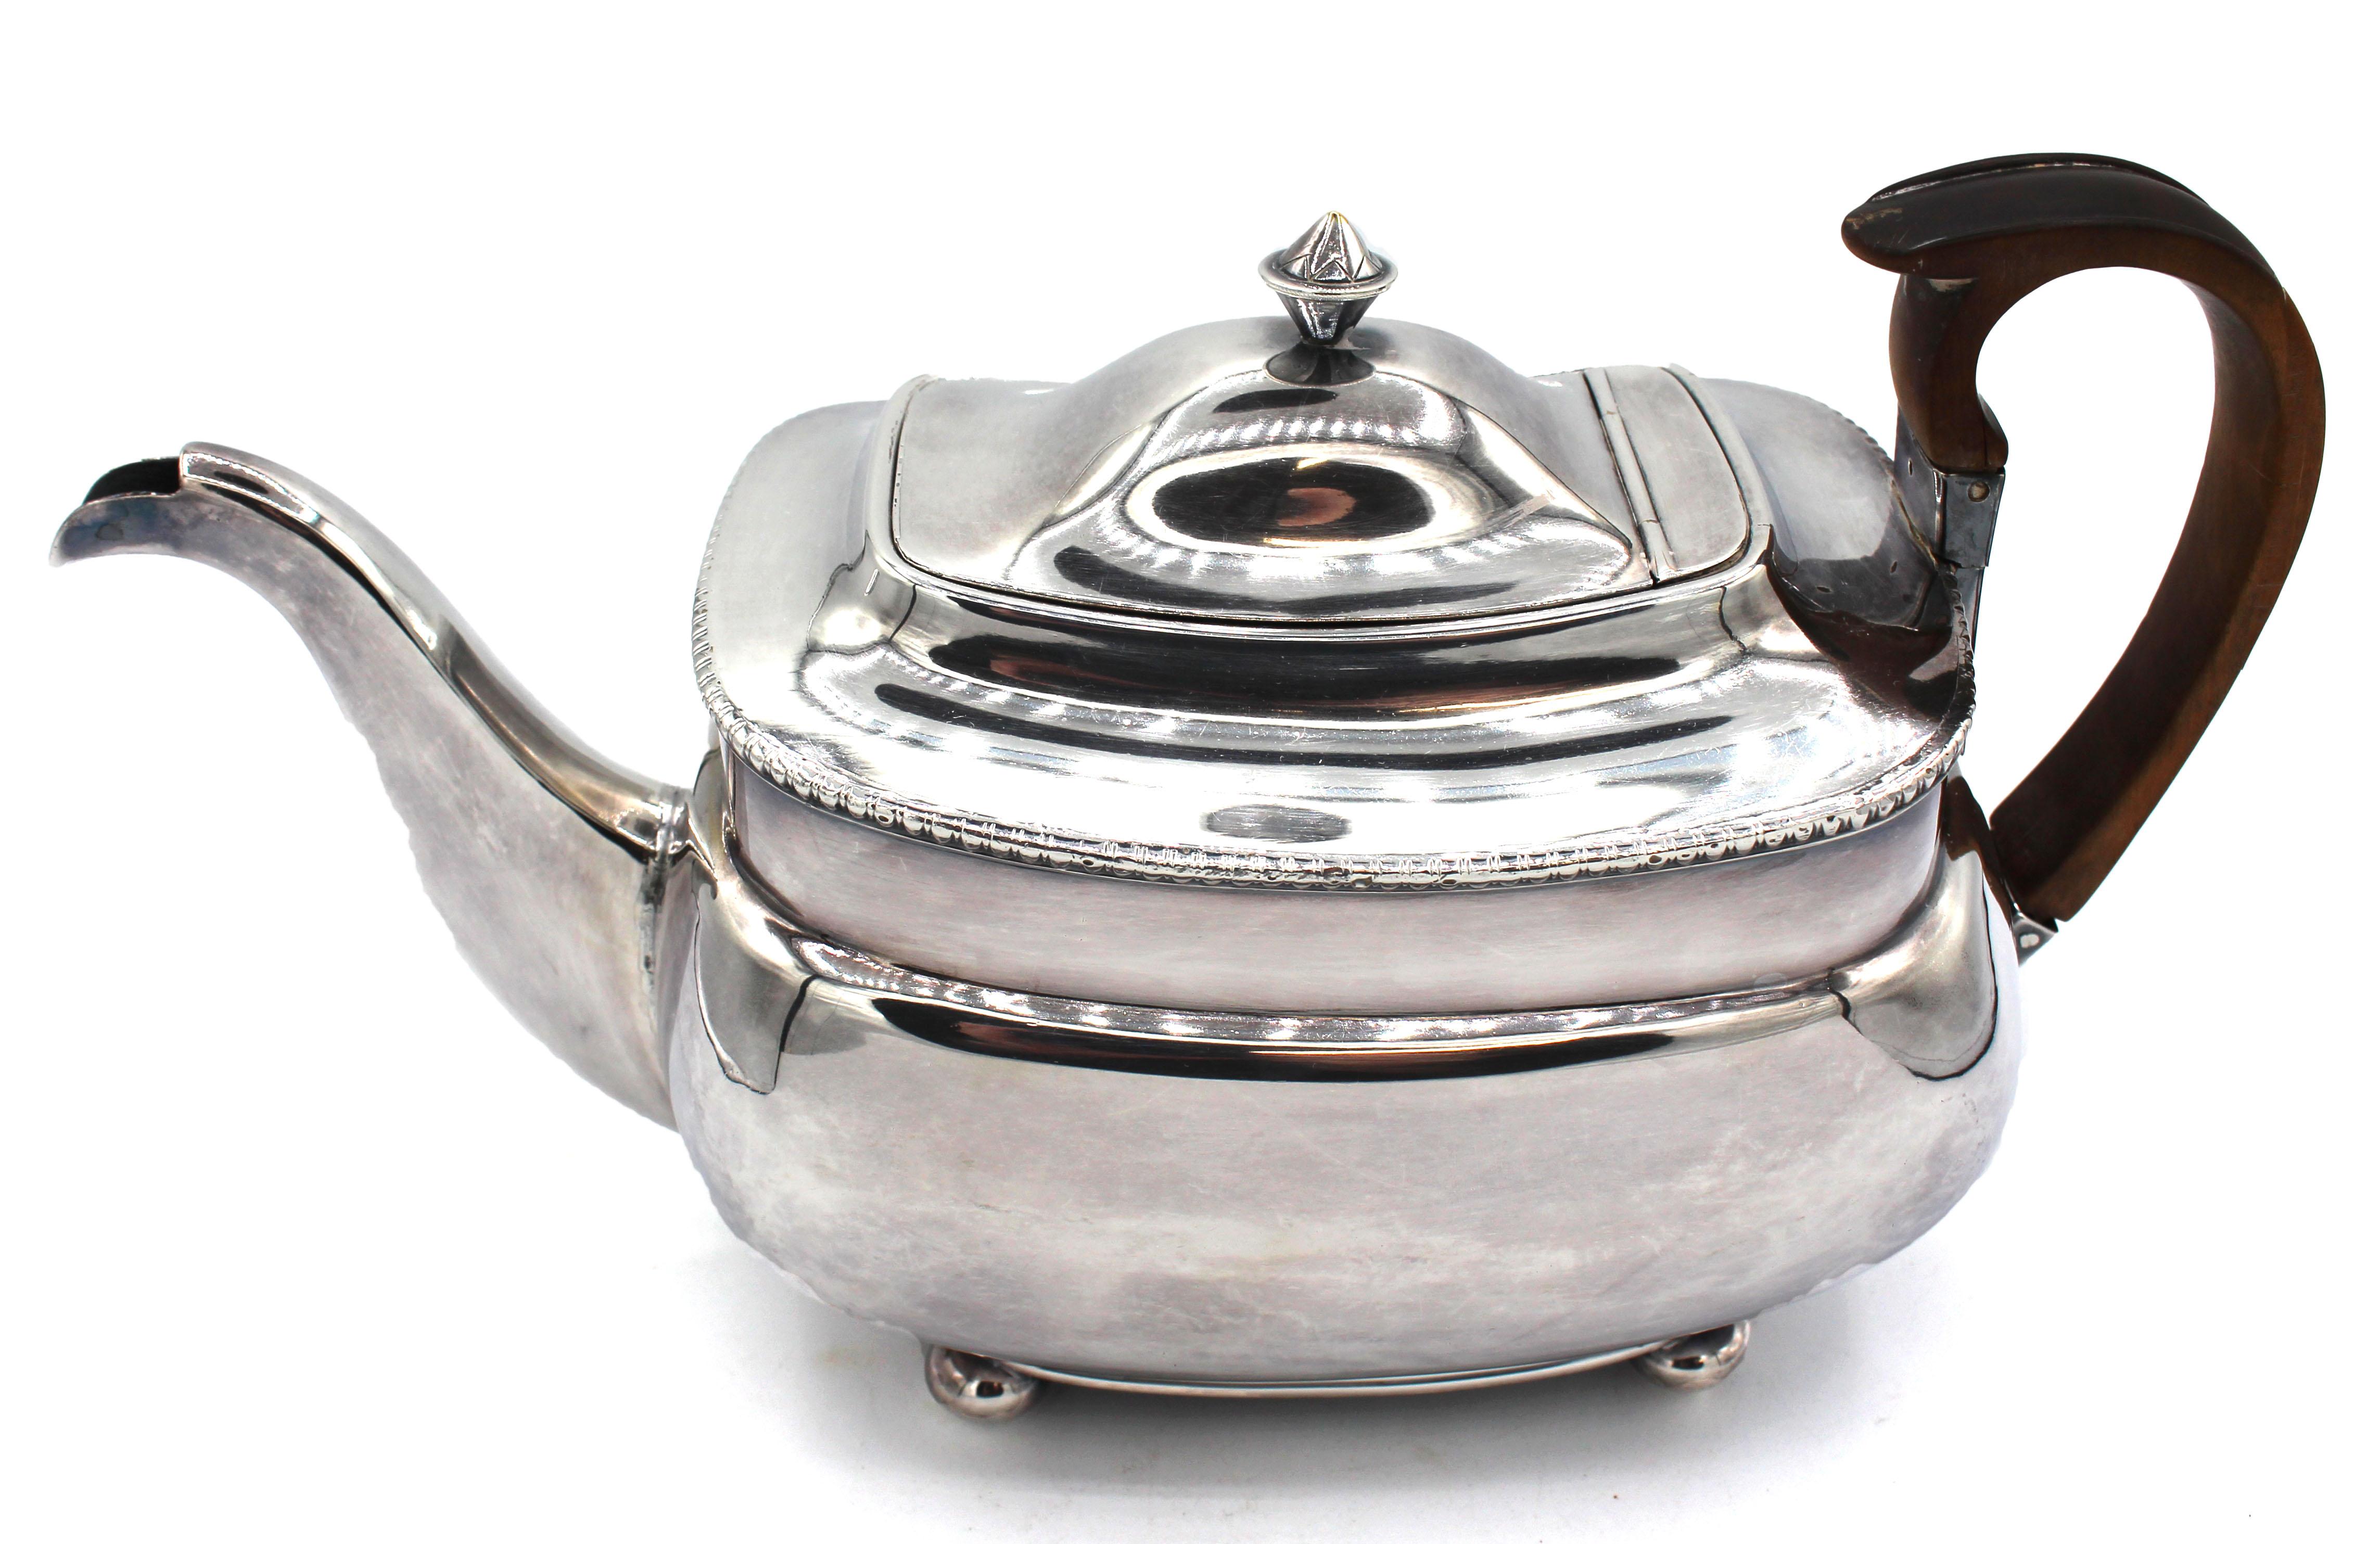 Victorian Old Sheffield Plate Tea Pot with Pearwood Handle, circa 1820, English For Sale